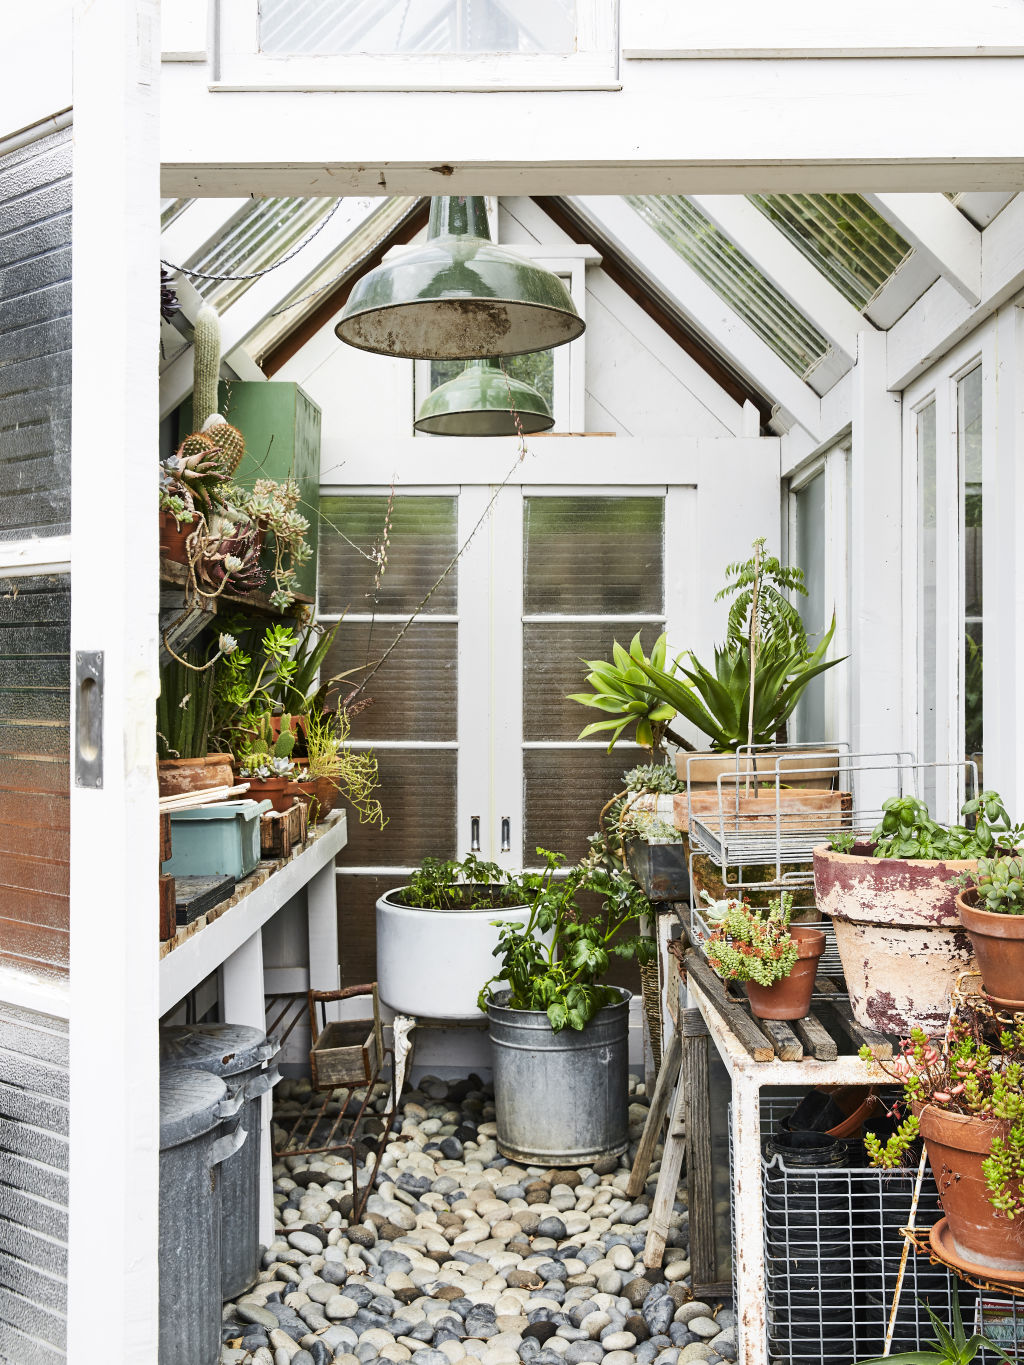 Inside the glasshouse, with pots and galvanised items collected from markets over the years. Photography / Caitlin Mills Styling / Annie Portelli